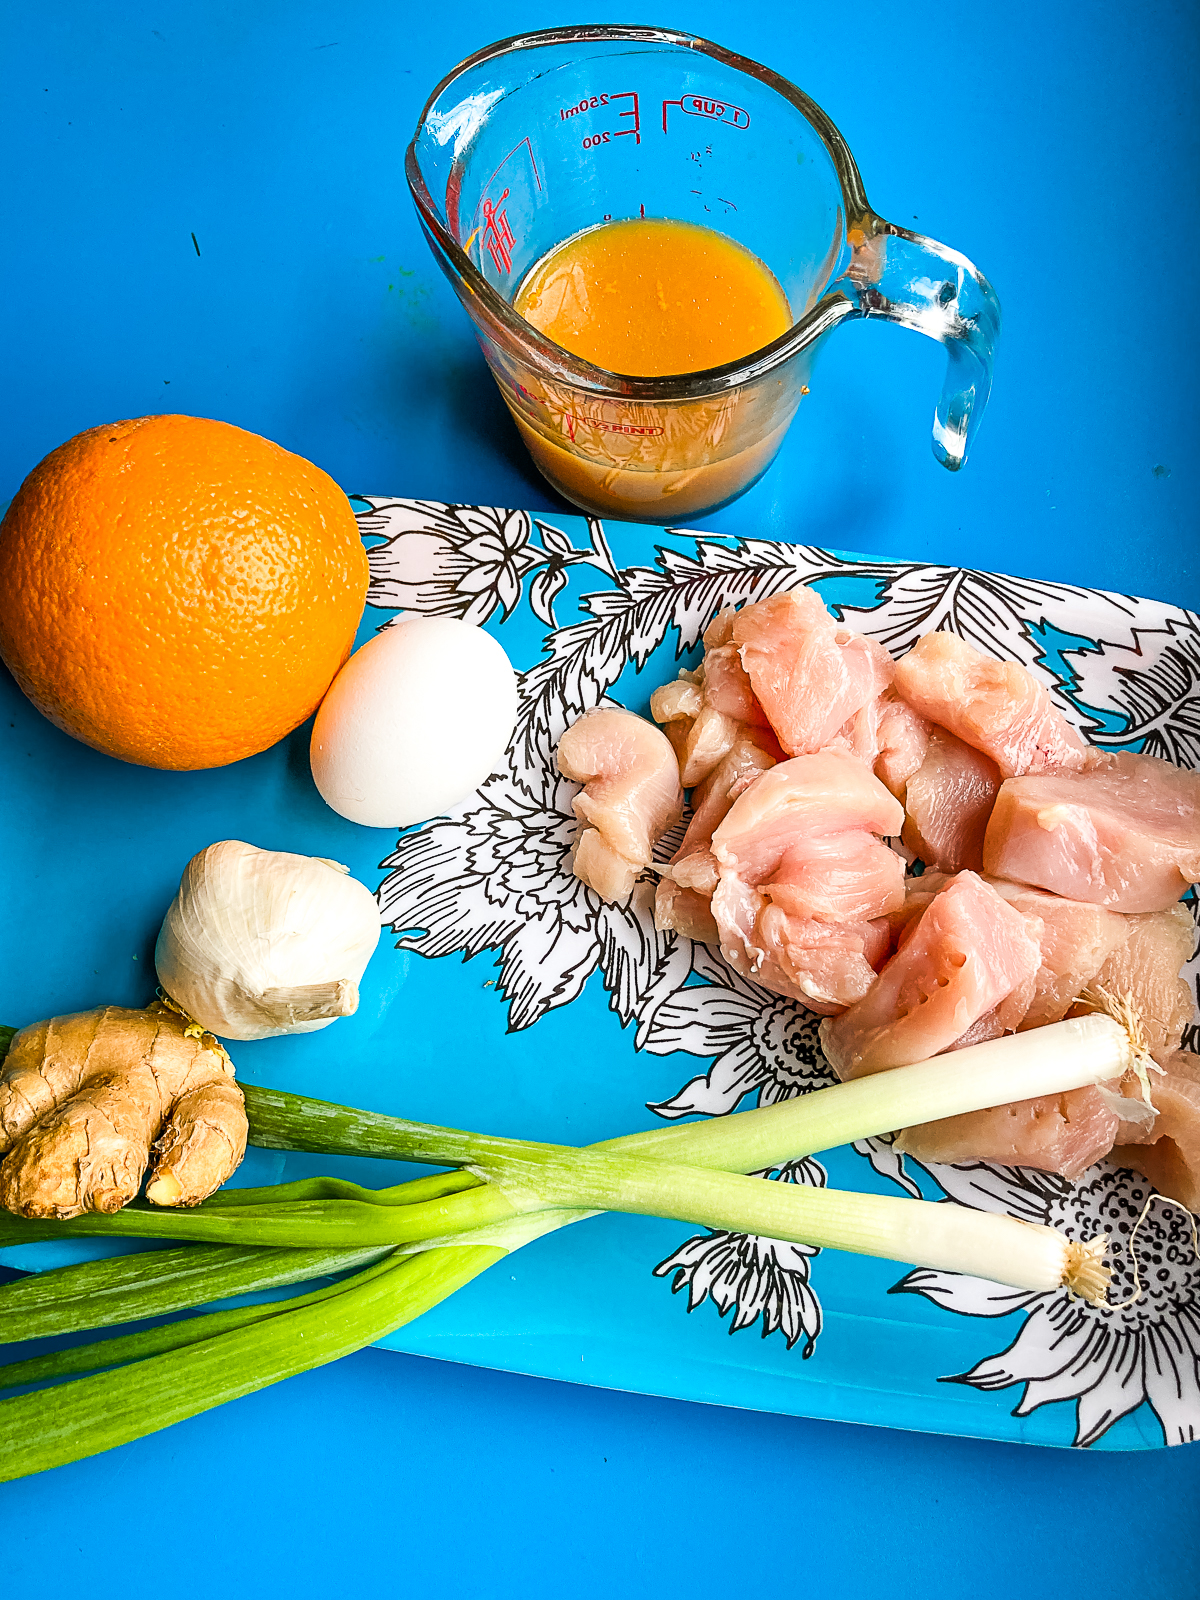 ingredients for easy orange chicken on a turquoise plate. Chicken, green onion, ginger, an egg, orange sauce, an orange, and garlic.